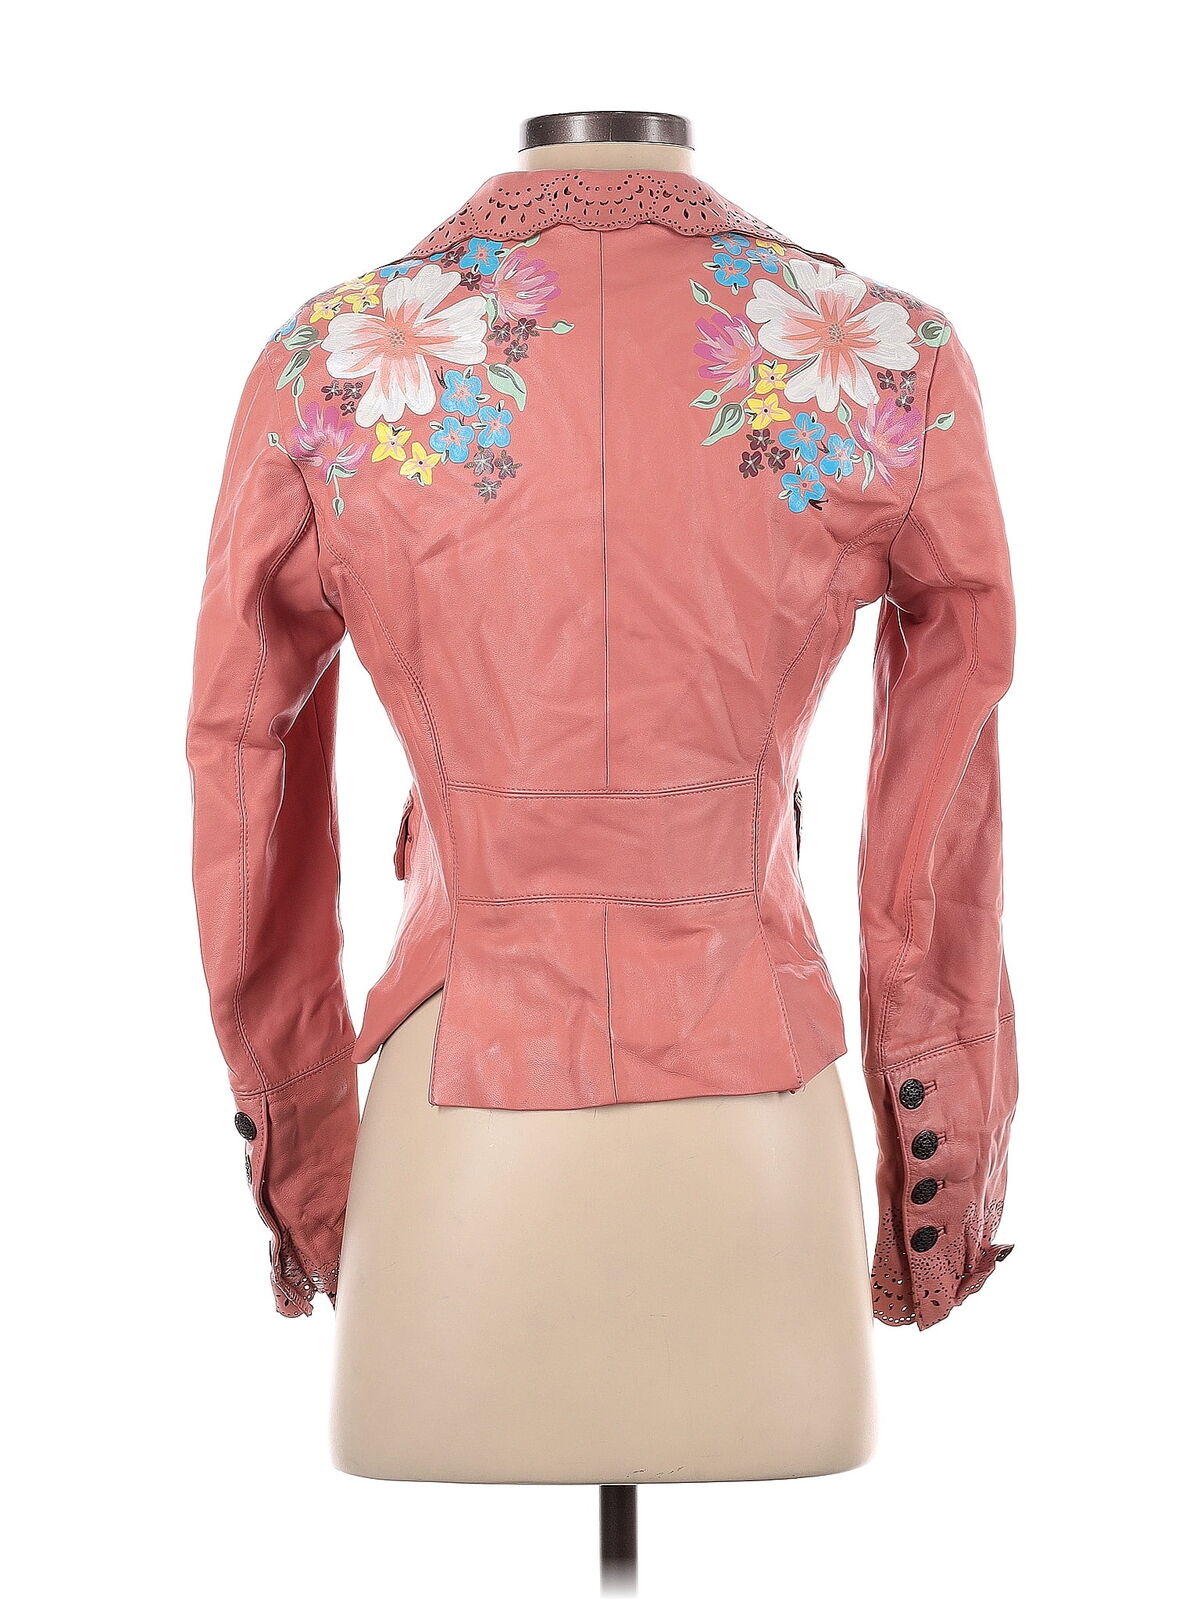 Wilsons Leather Women Pink Leather Jacket XS - image 2